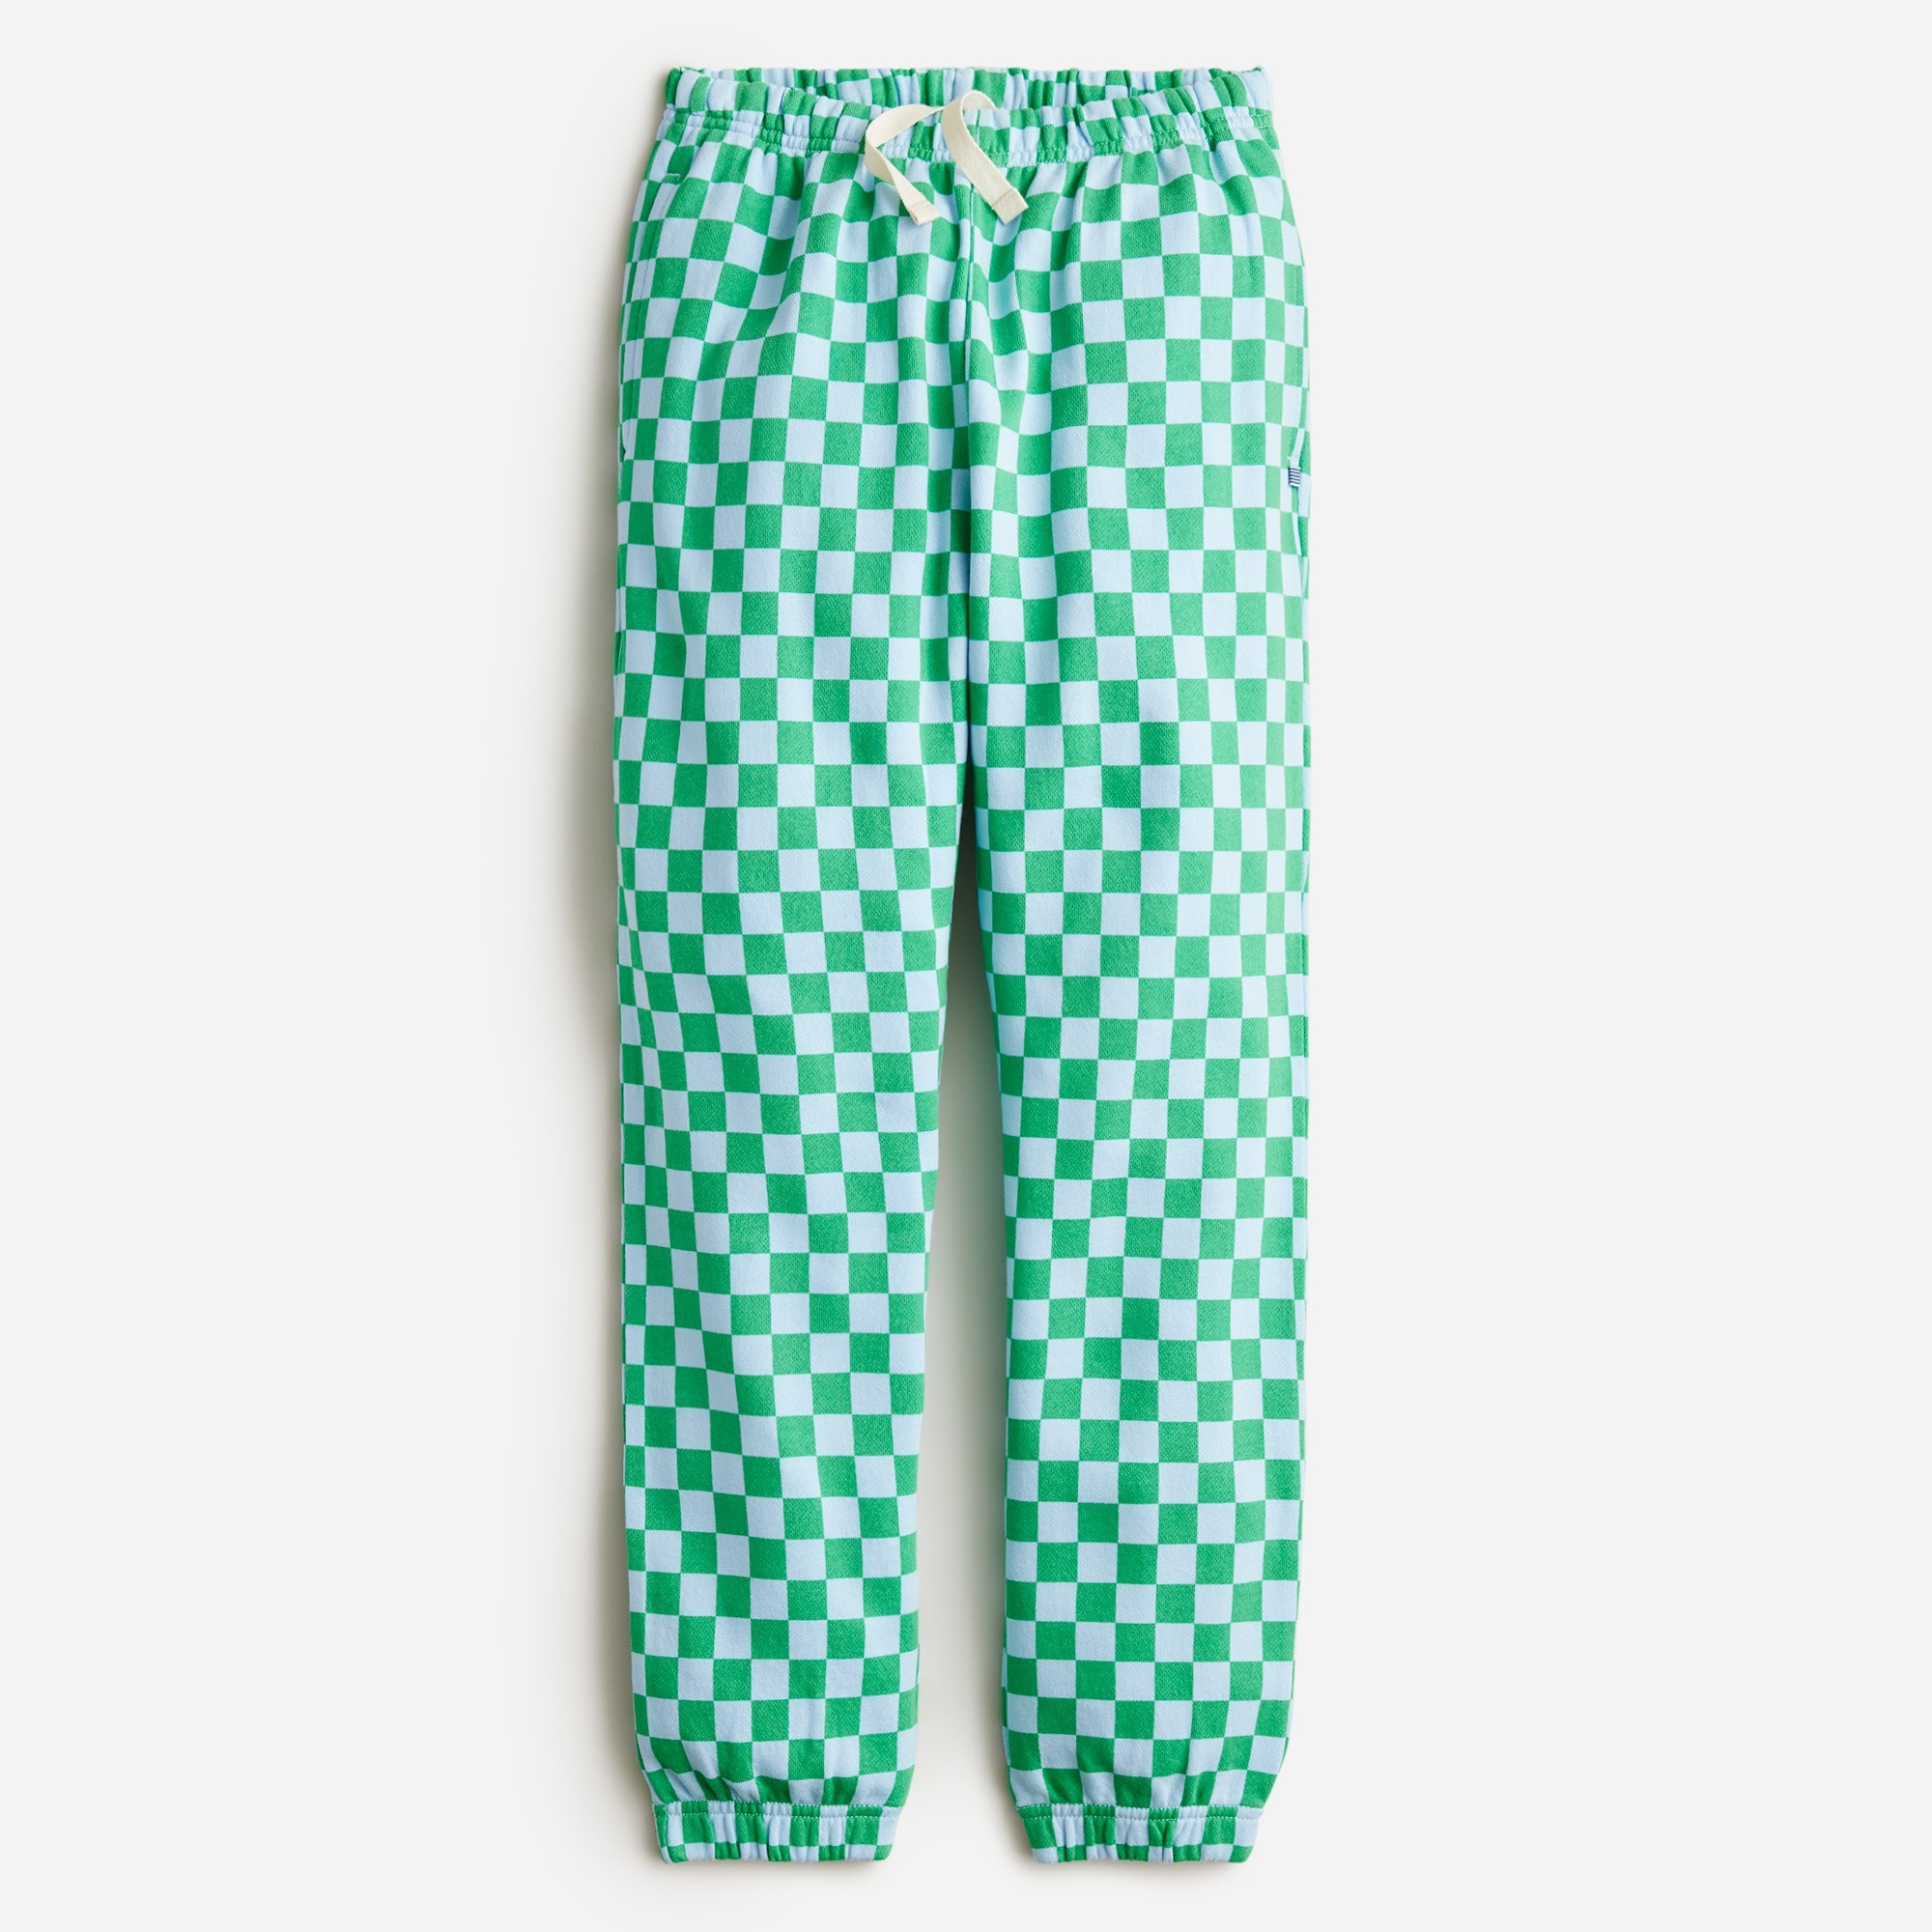 boys KID by Crewcuts garment-dyed sweatpant in checkerboard print